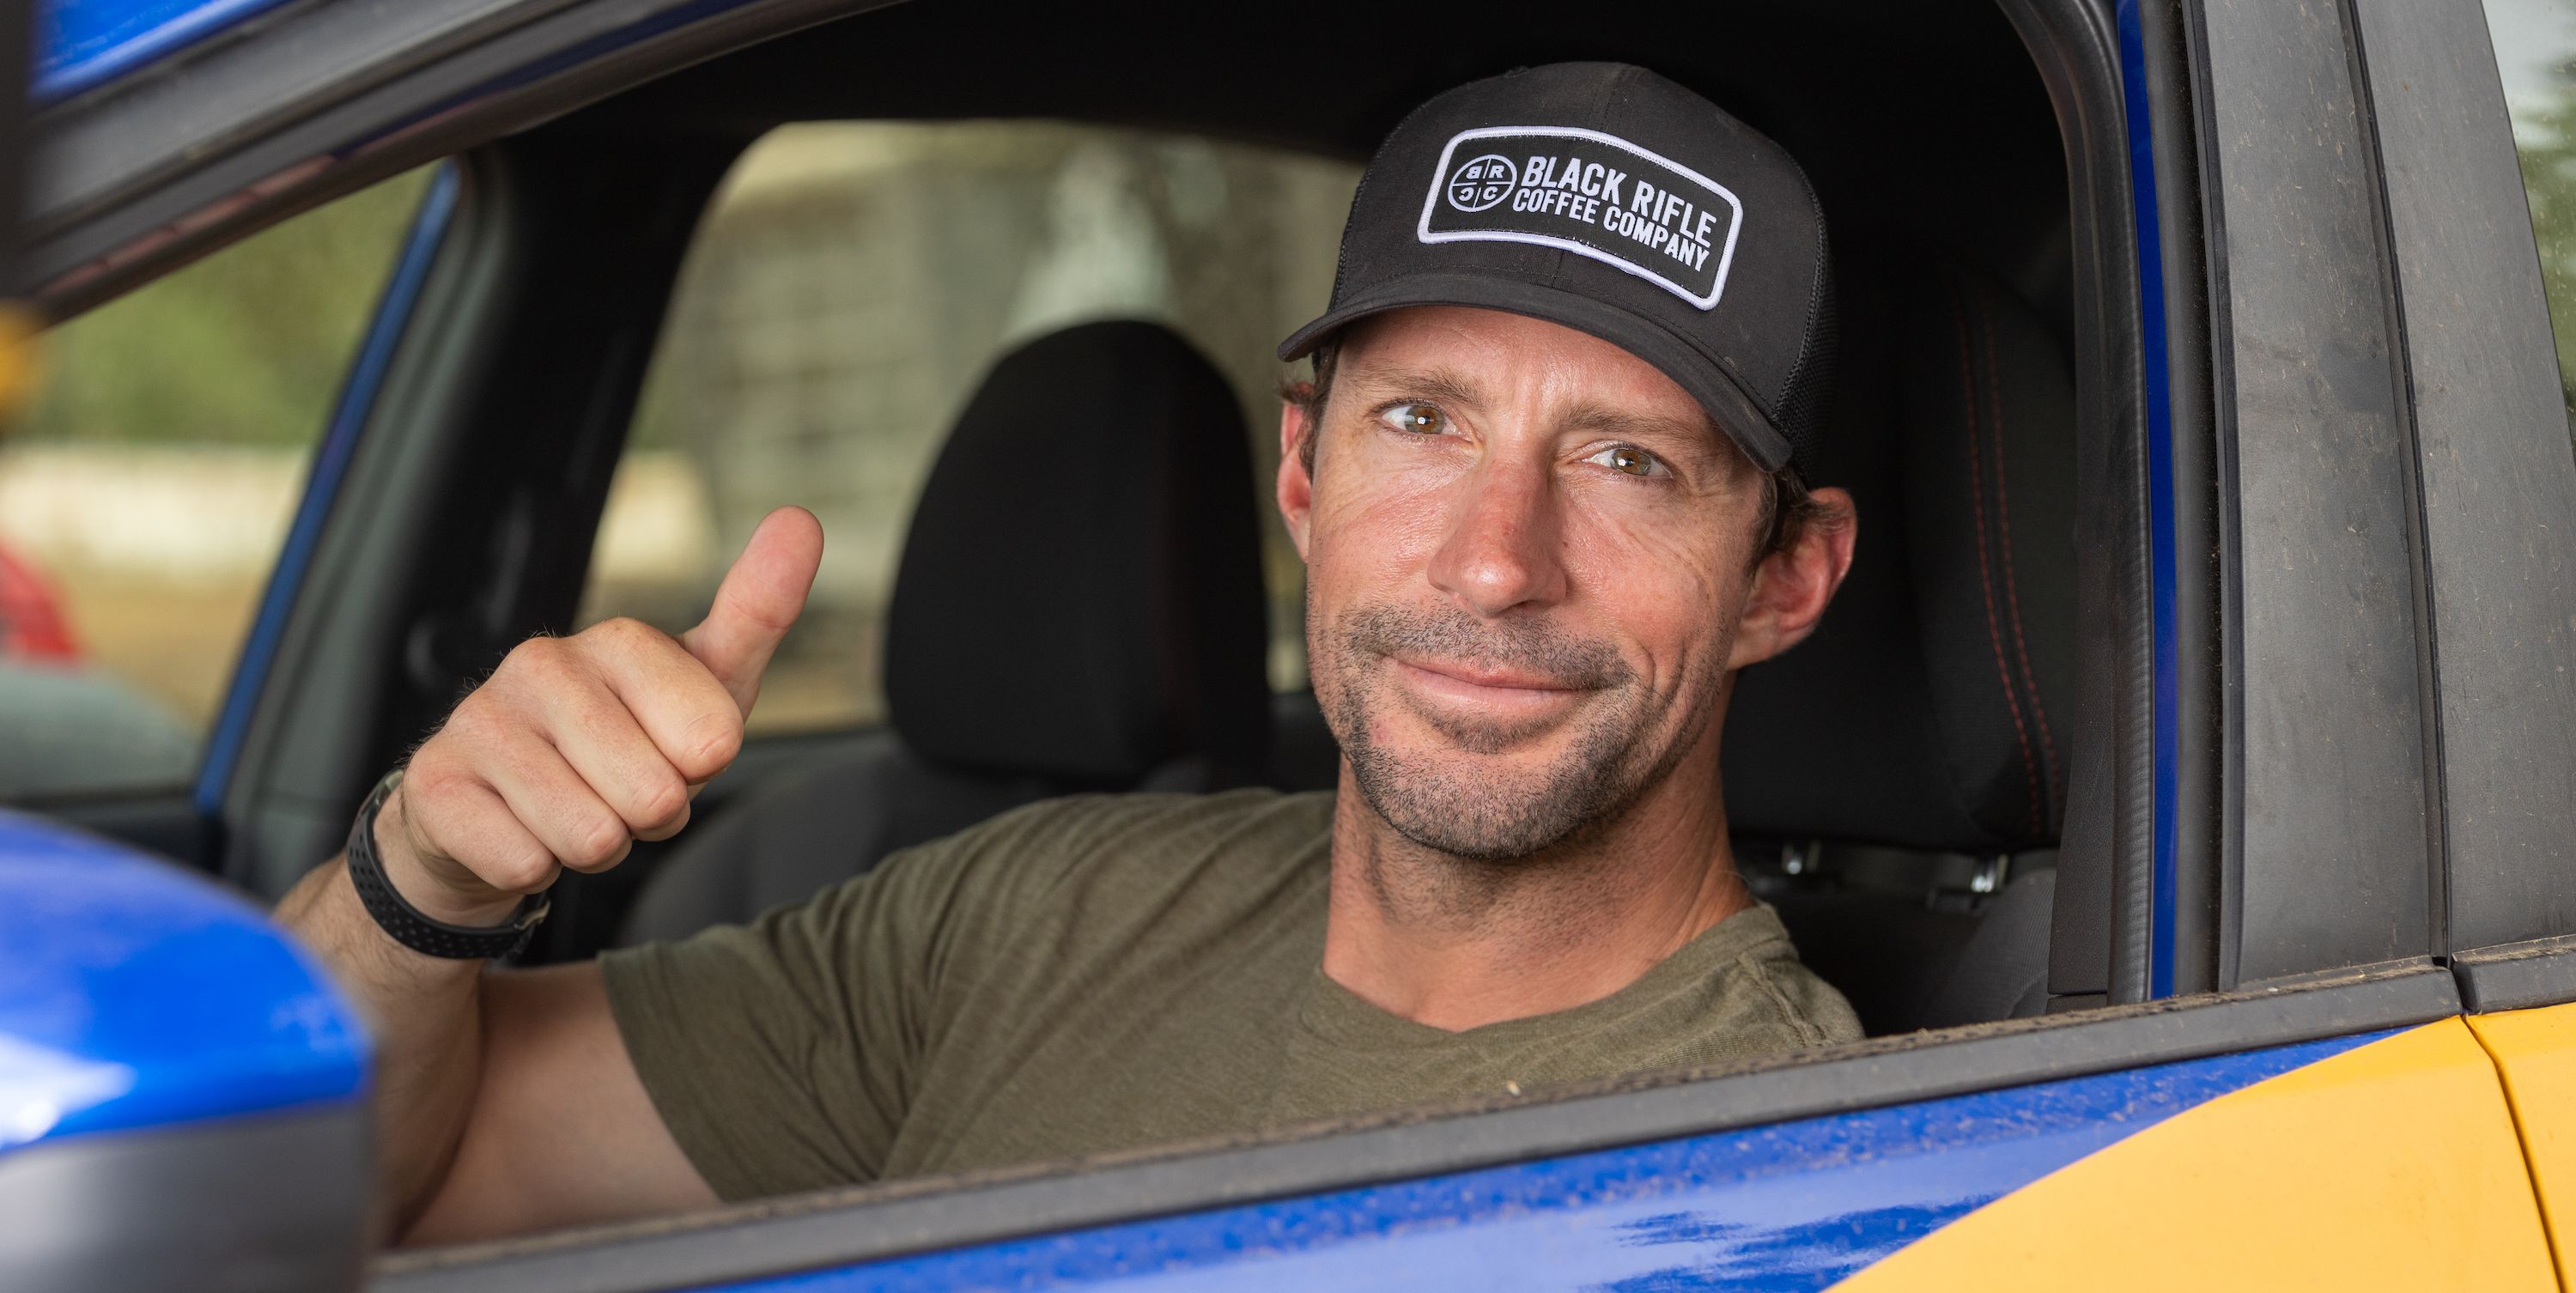 Official: Travis Pastrana Will Attempt to Race in the 2023 Daytona 500